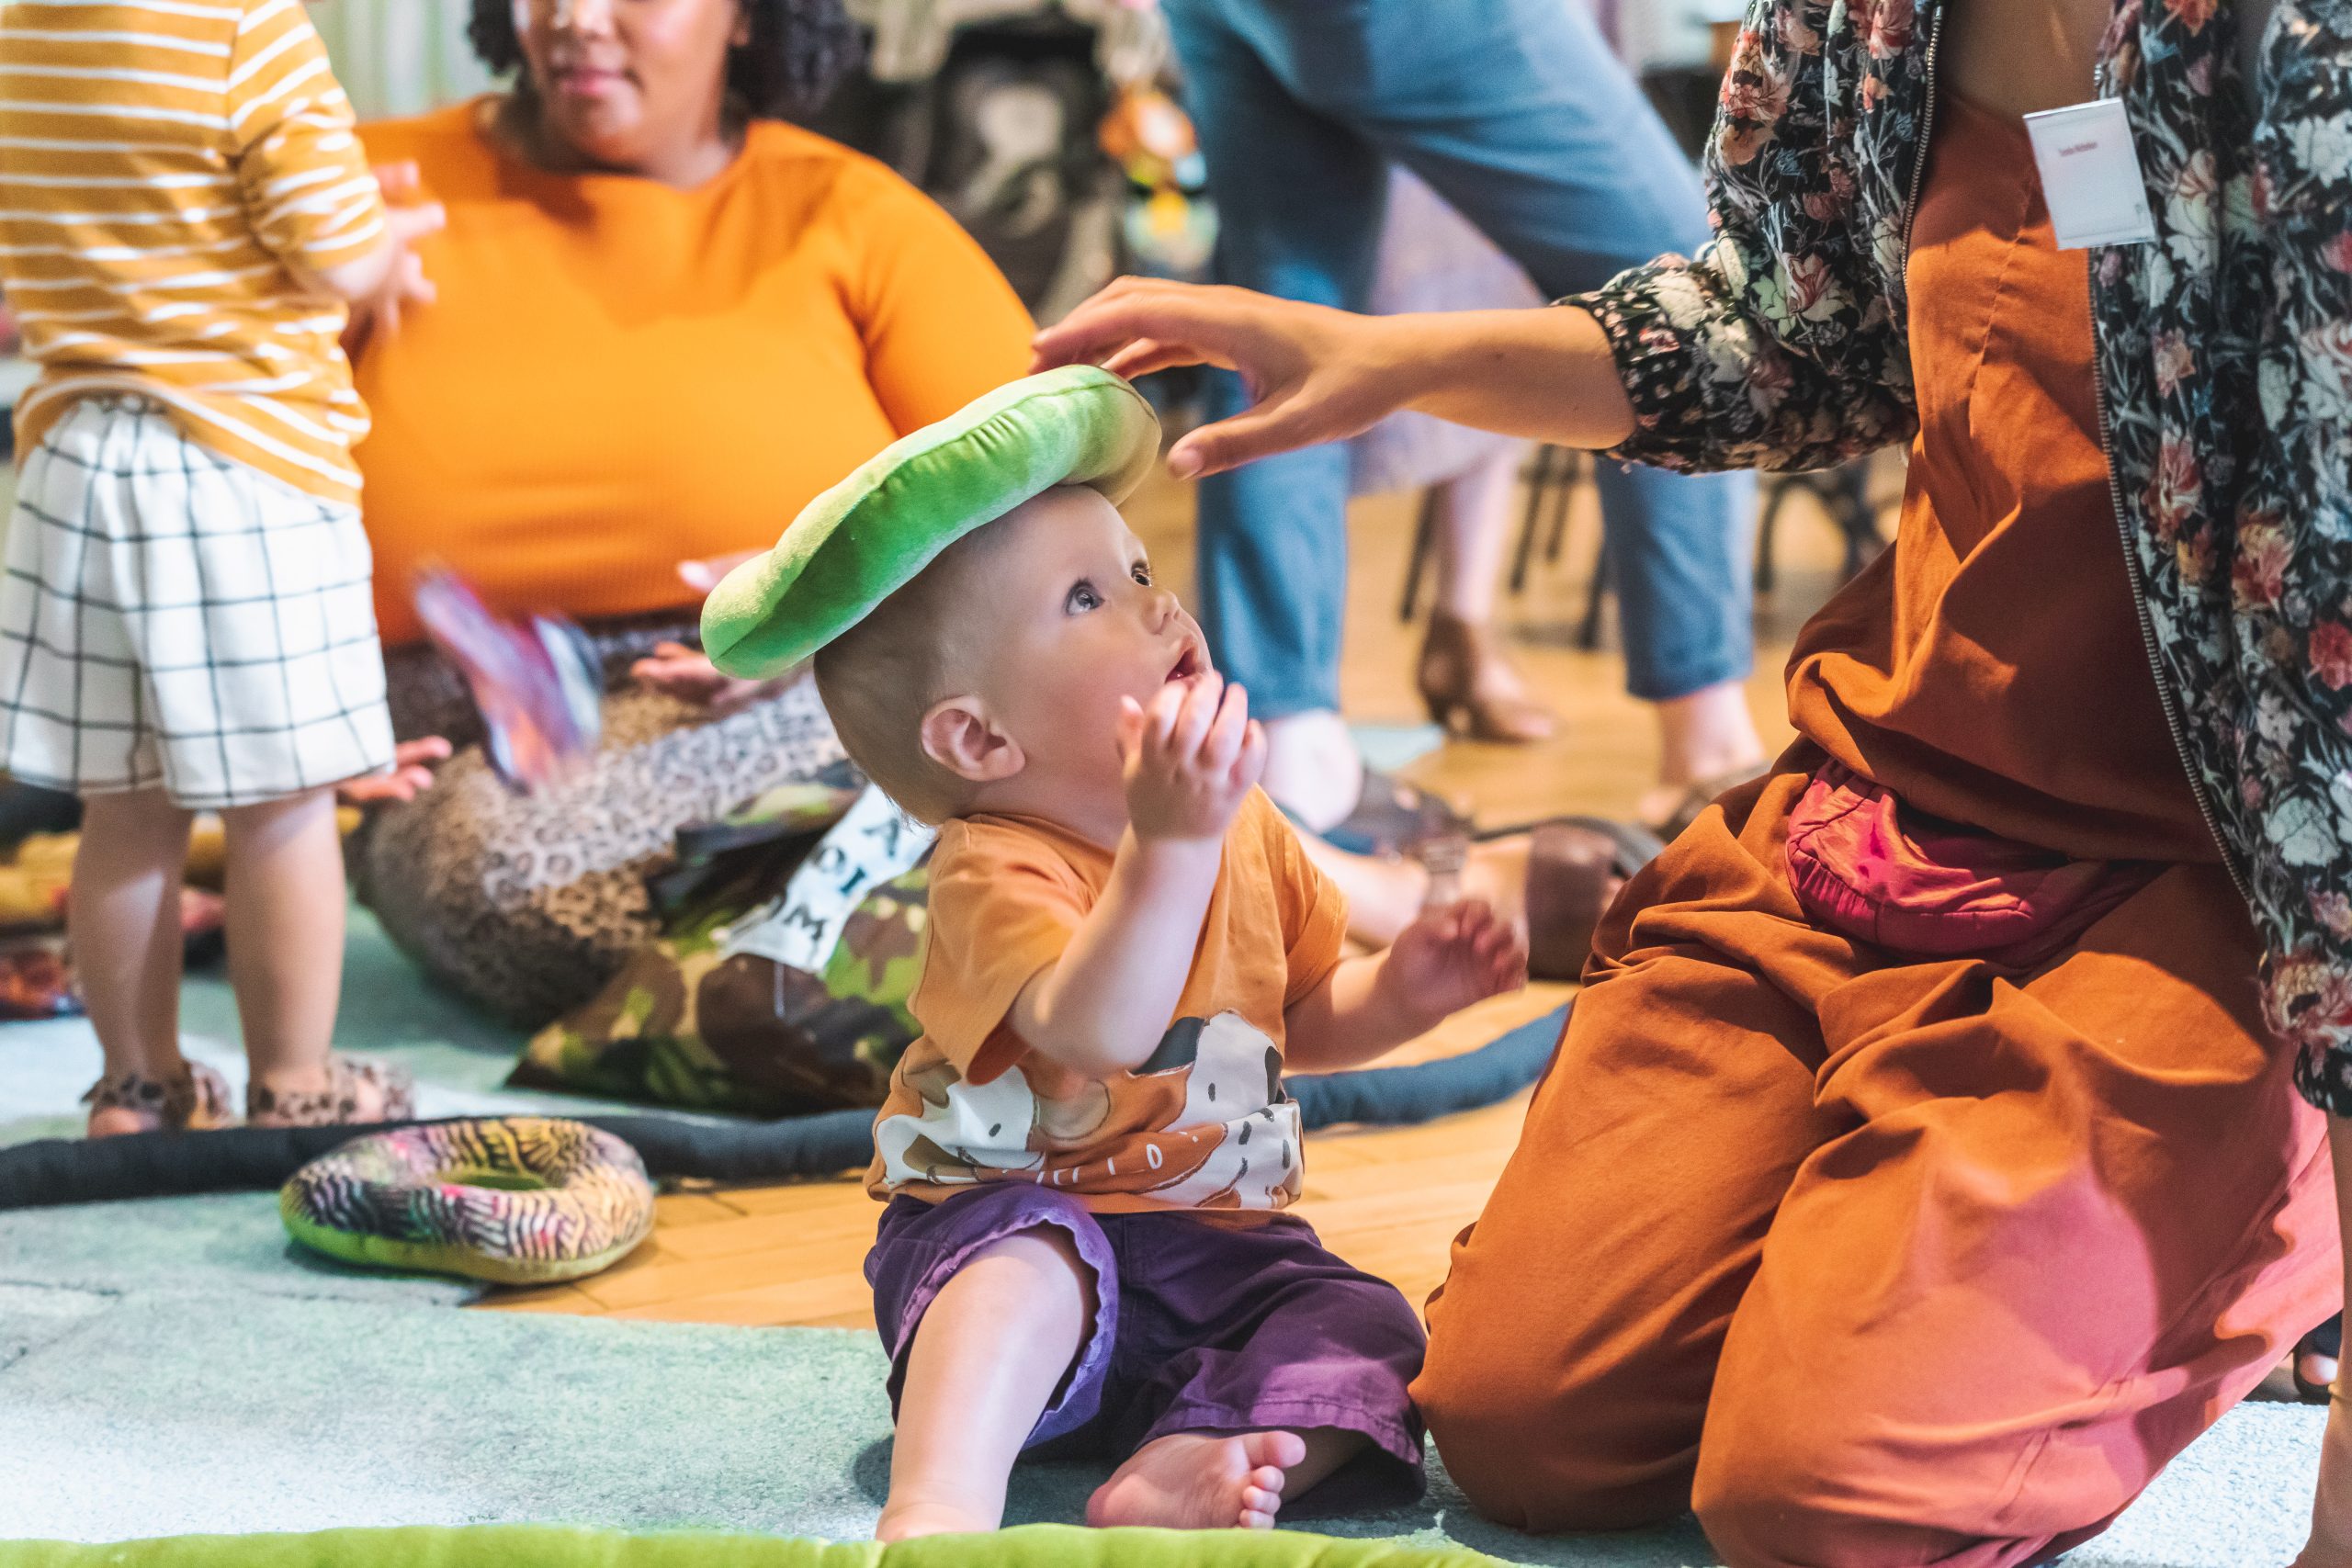 Photo of a toddler seated on a rug with a green doughnut shaped cushion on his head, looking up at a woman, whose face is out of the frame.